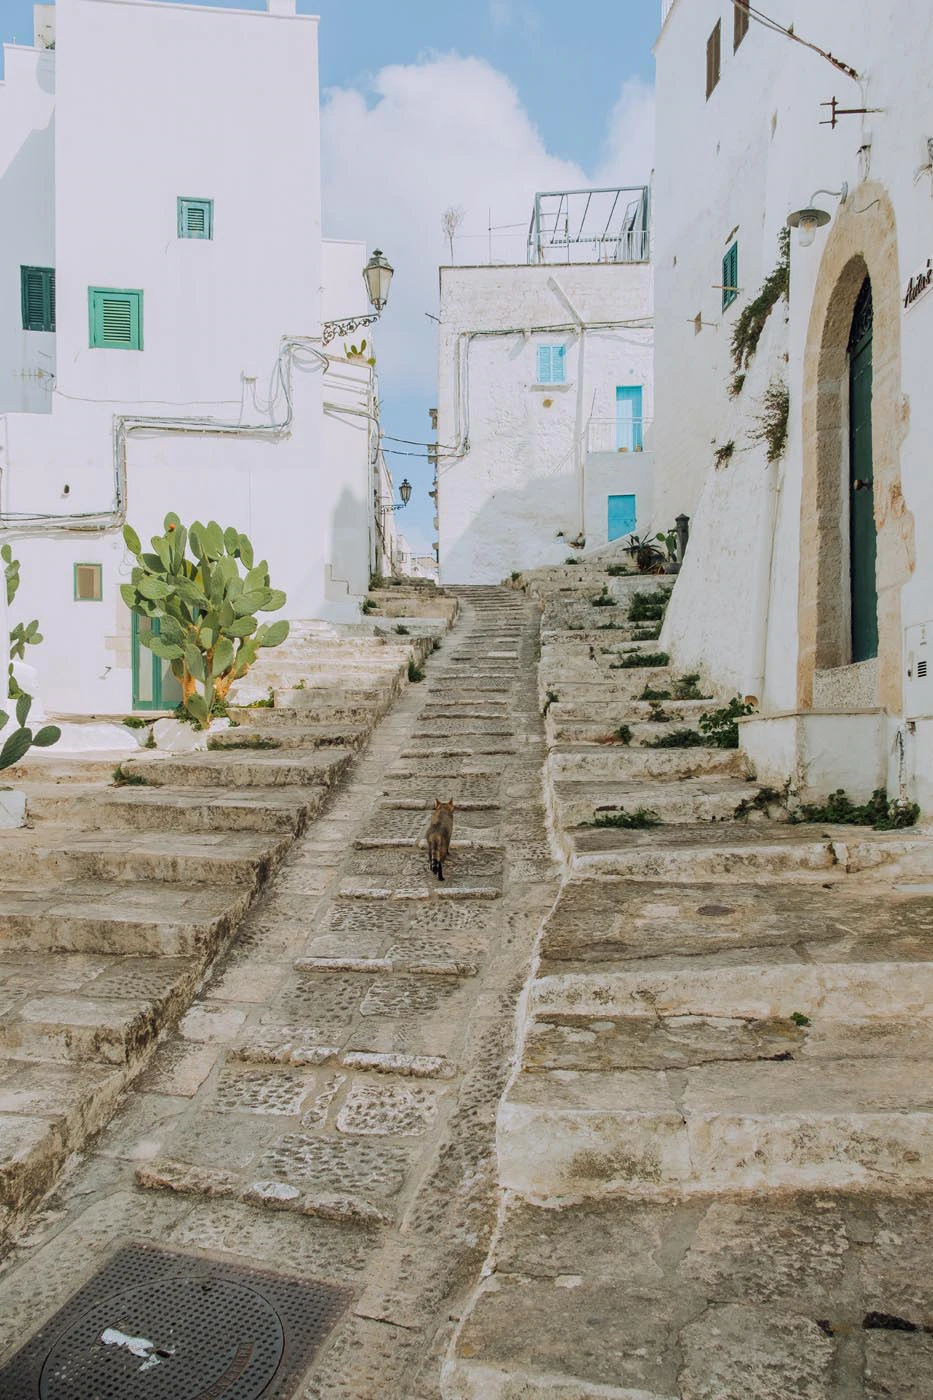 Things to do in Ostuni - Vico Balsamo de Landria with cat